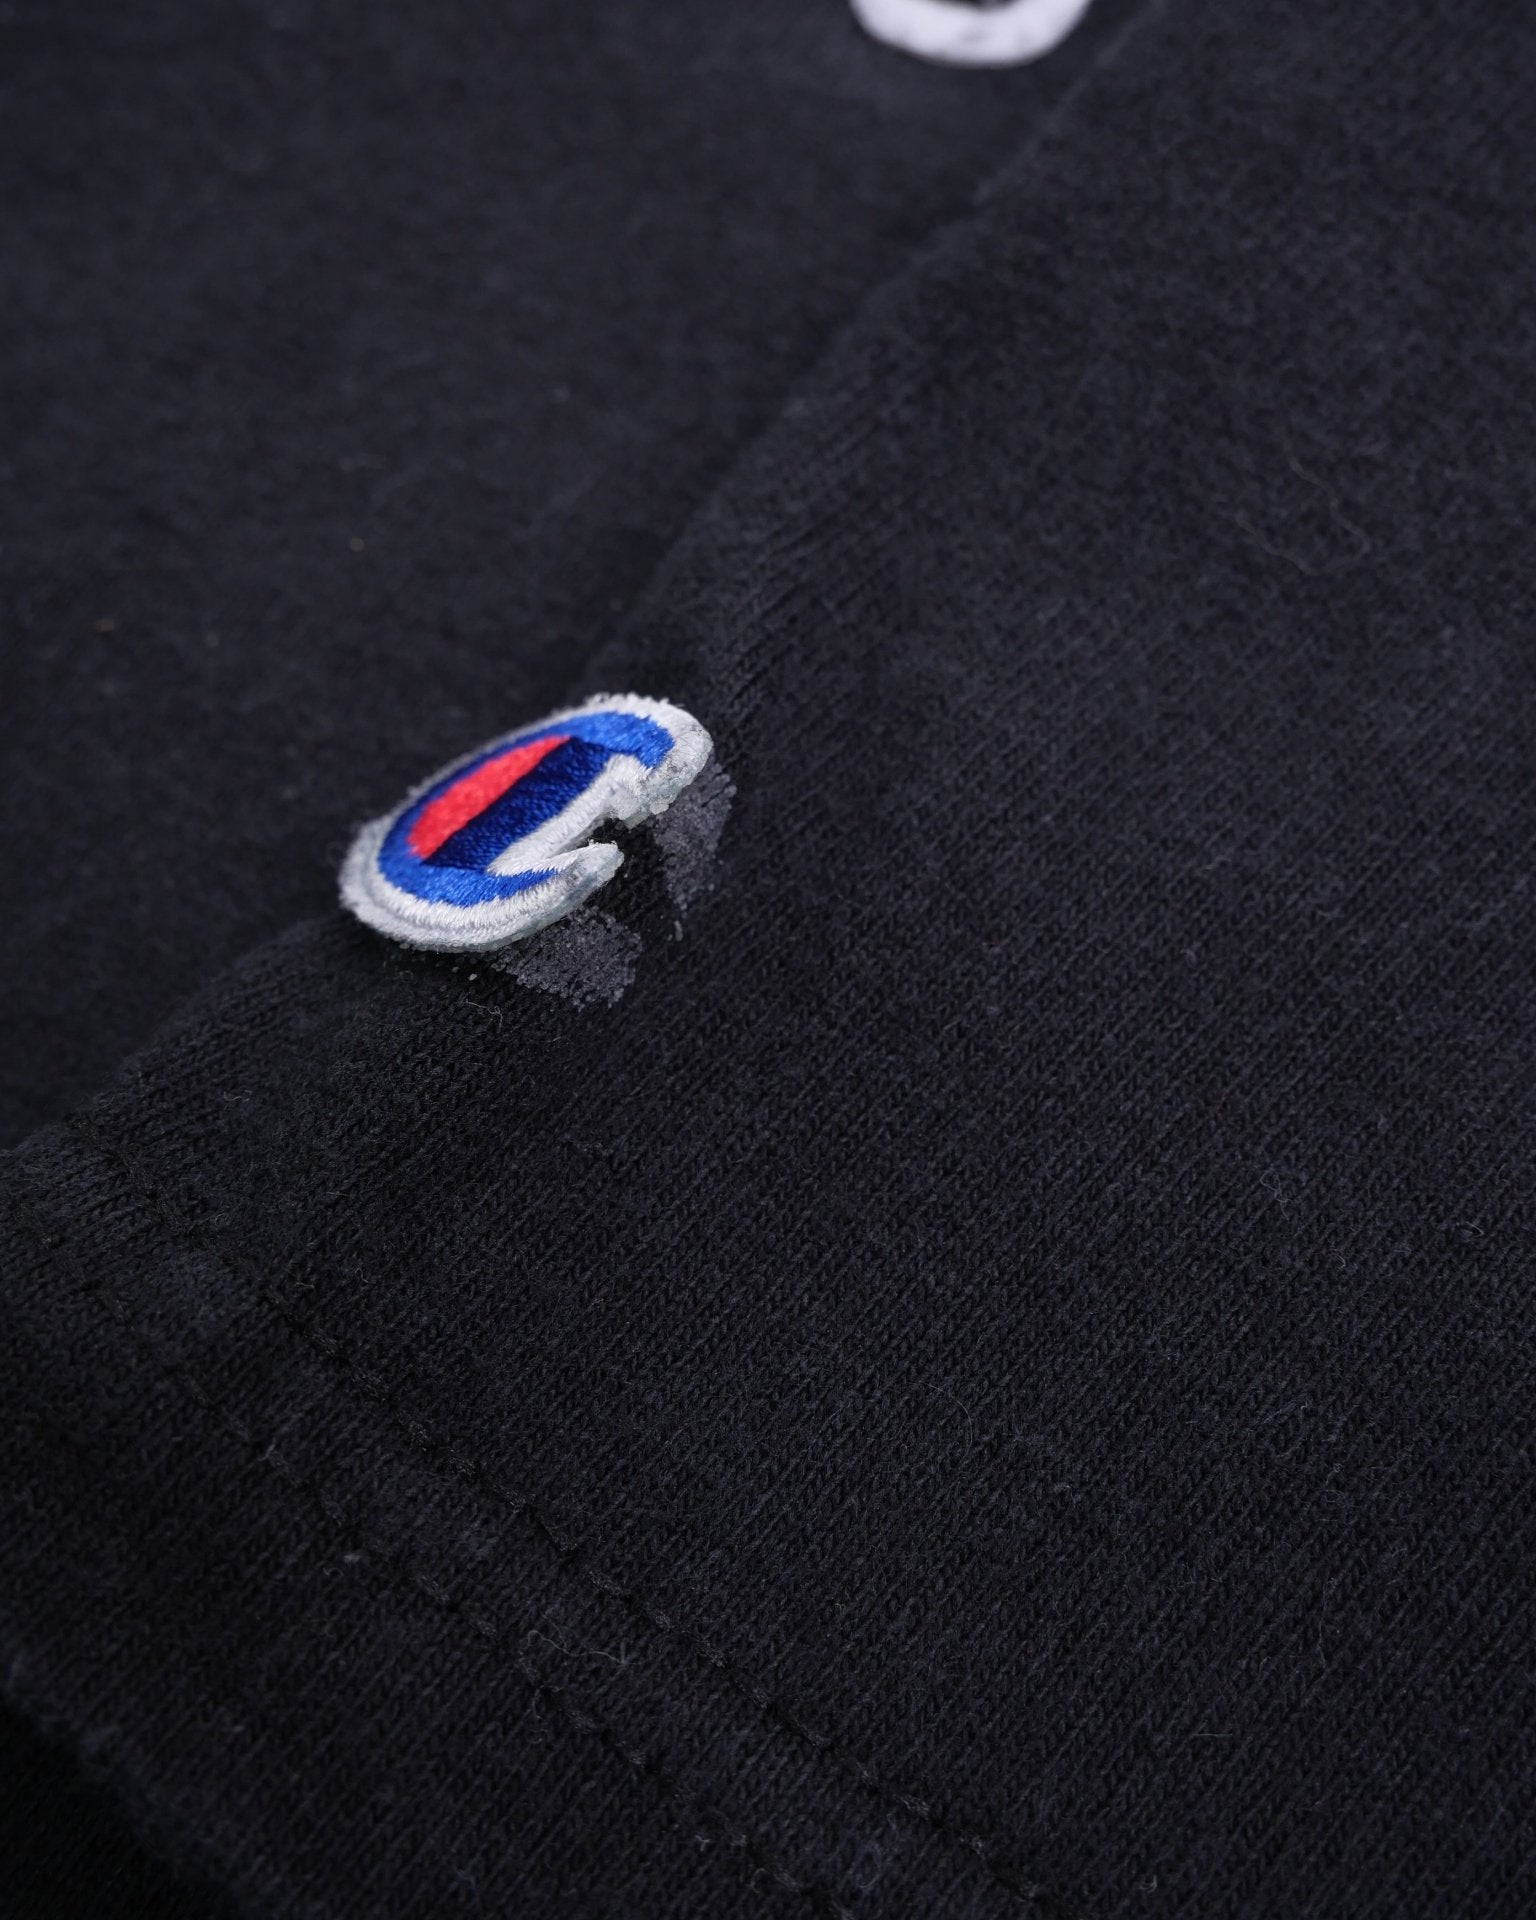 Champion embroidered Spellout Vintage Shirt - Peeces